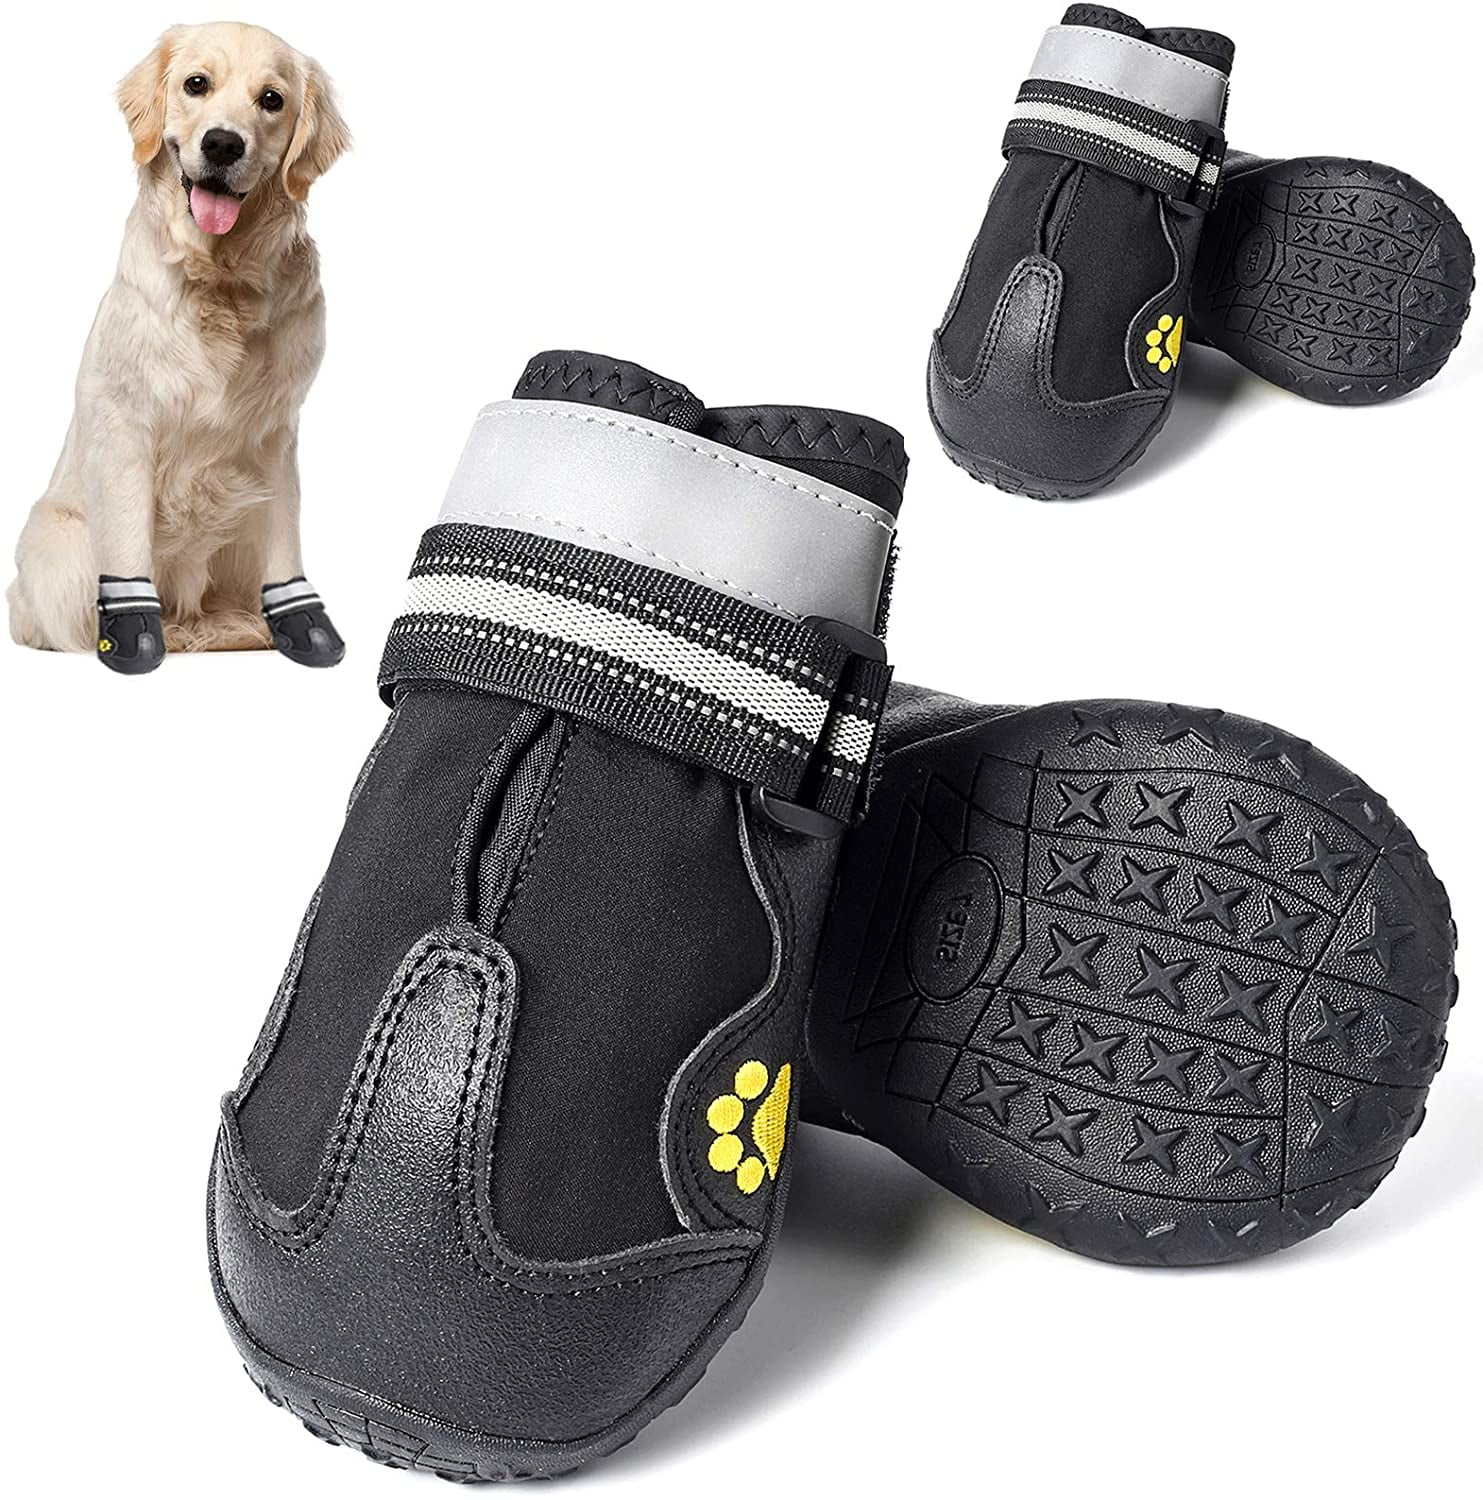 CALHNNA Dog Shoes Anti-Slip Shoes Dog Boot for Small Medium Dogs and Cat Puppies 4PCS